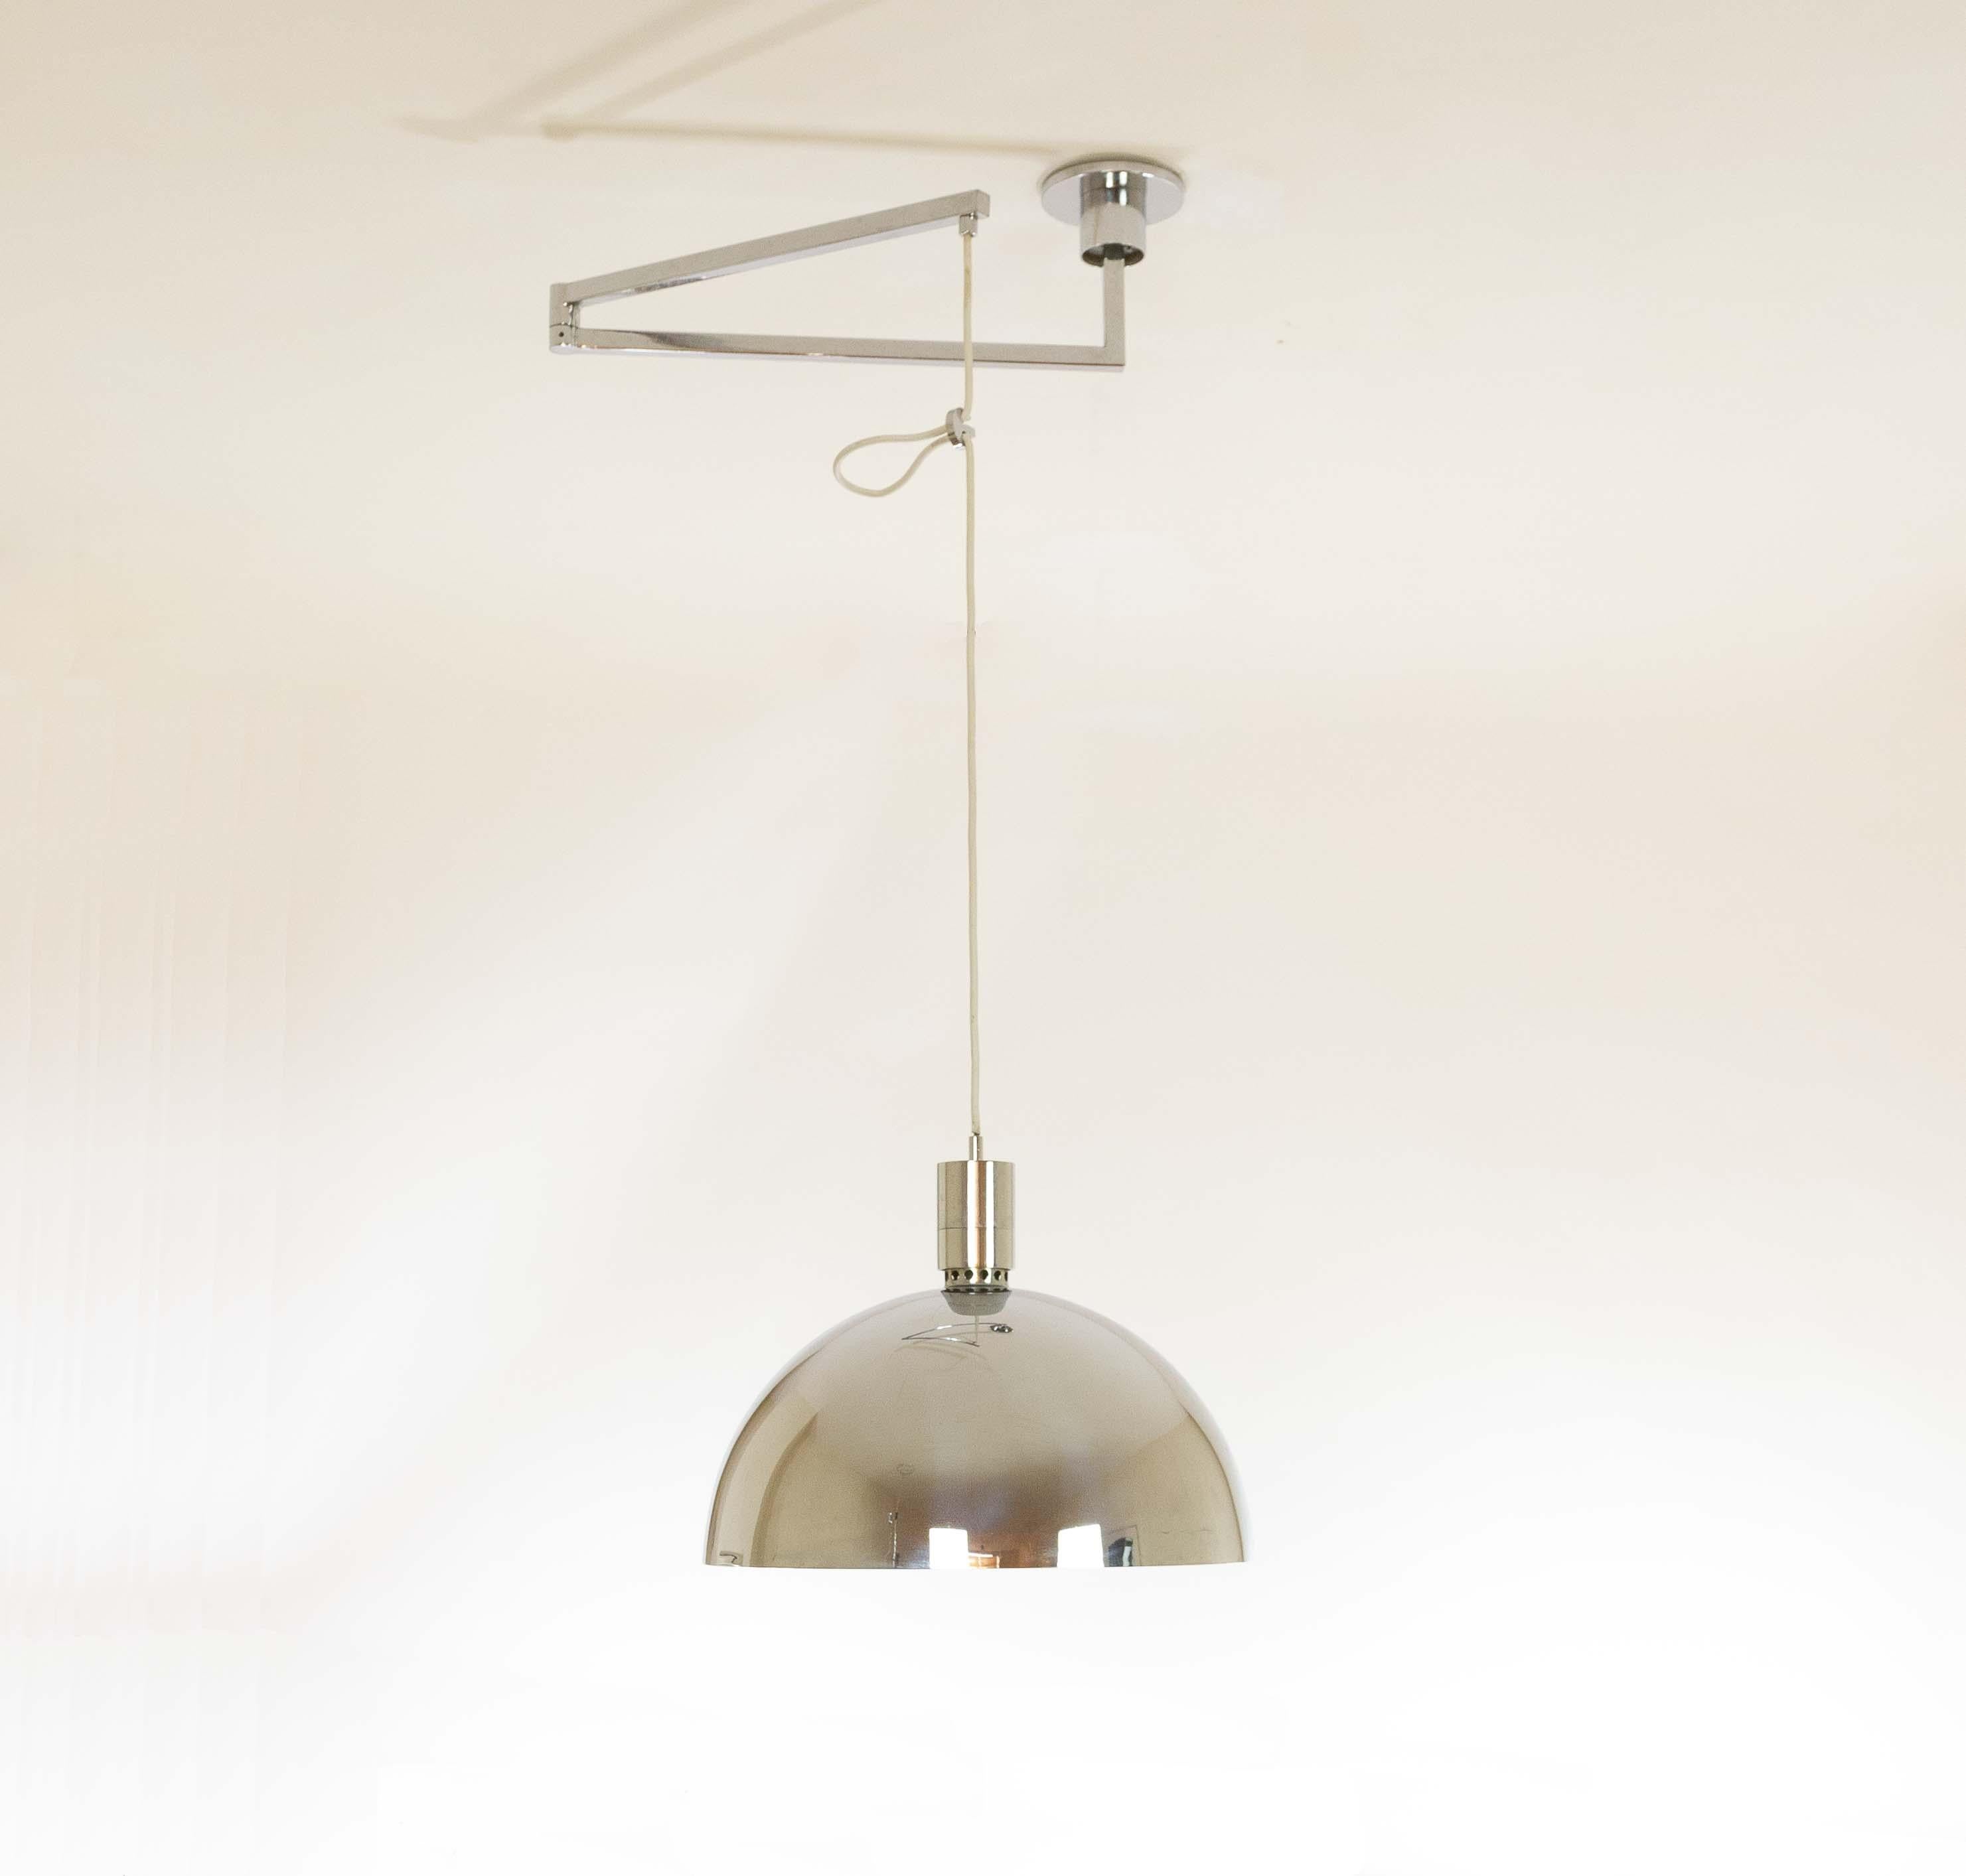 Ceiling lamp No. designed by Franco Albini, Franca Helg and Antonio Piva and manufactured by Sirrah in 1969.

The model is a part of the AM/AS series that includes table lamps, wall lamps, floor lamps and suspensions. The lamps are available with